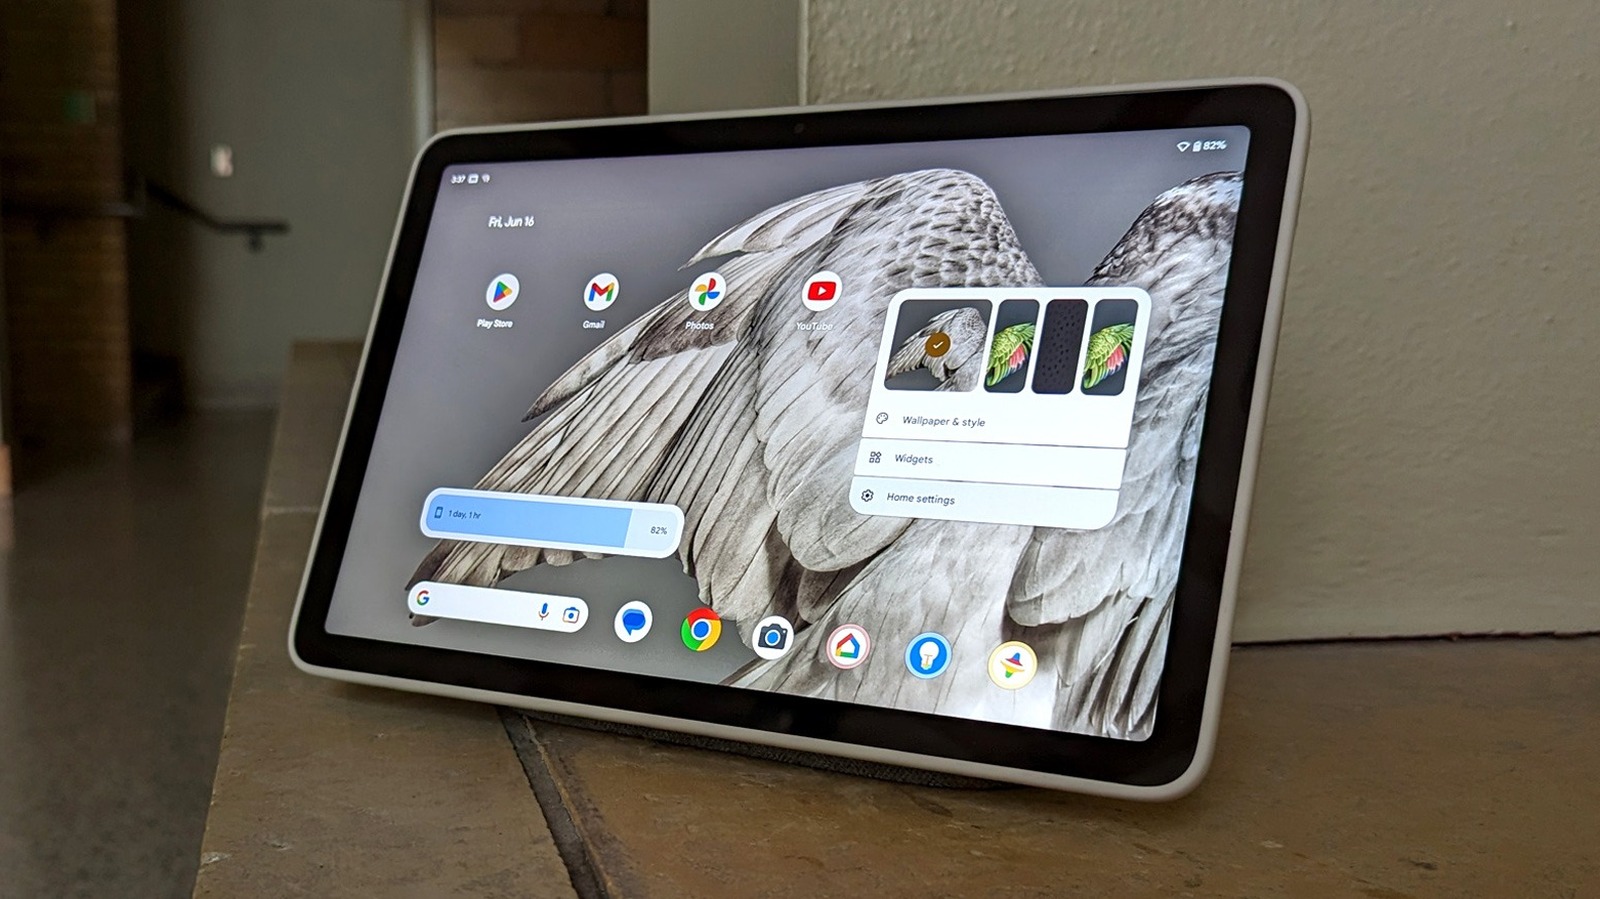 Google Pixel Tablet review: Release date and where to order